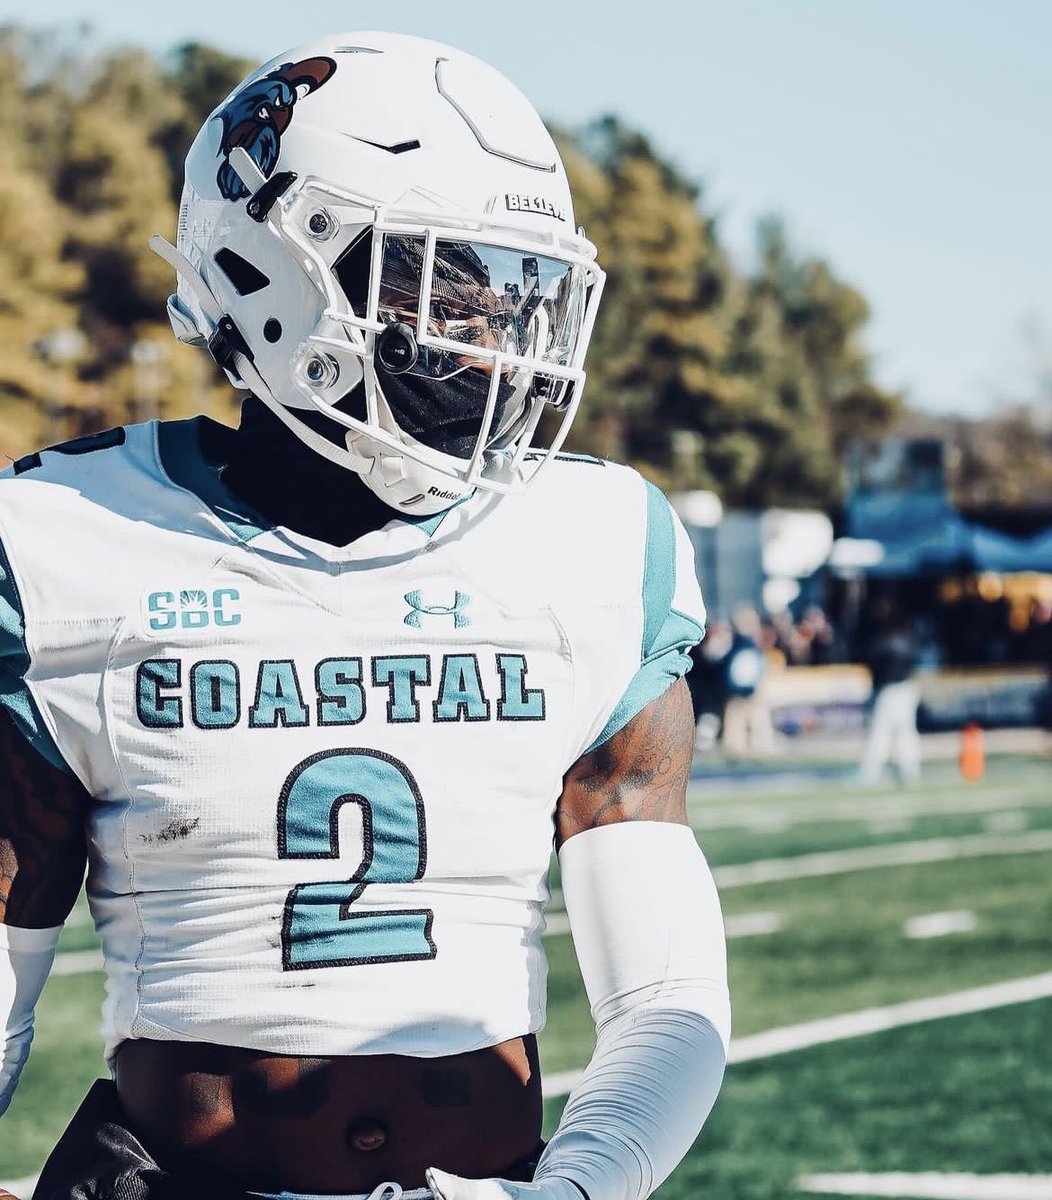 Thank You God!! I am truly blessed to receive a(n) offer from Coastal Carolina University #TTP @Coach_Naivar @mb_3three @Coach1Coleman @Grindseason3 @EA_Golightly @coachjtstovall @Mainman413 @CoachTj56 @coachbaileySWD